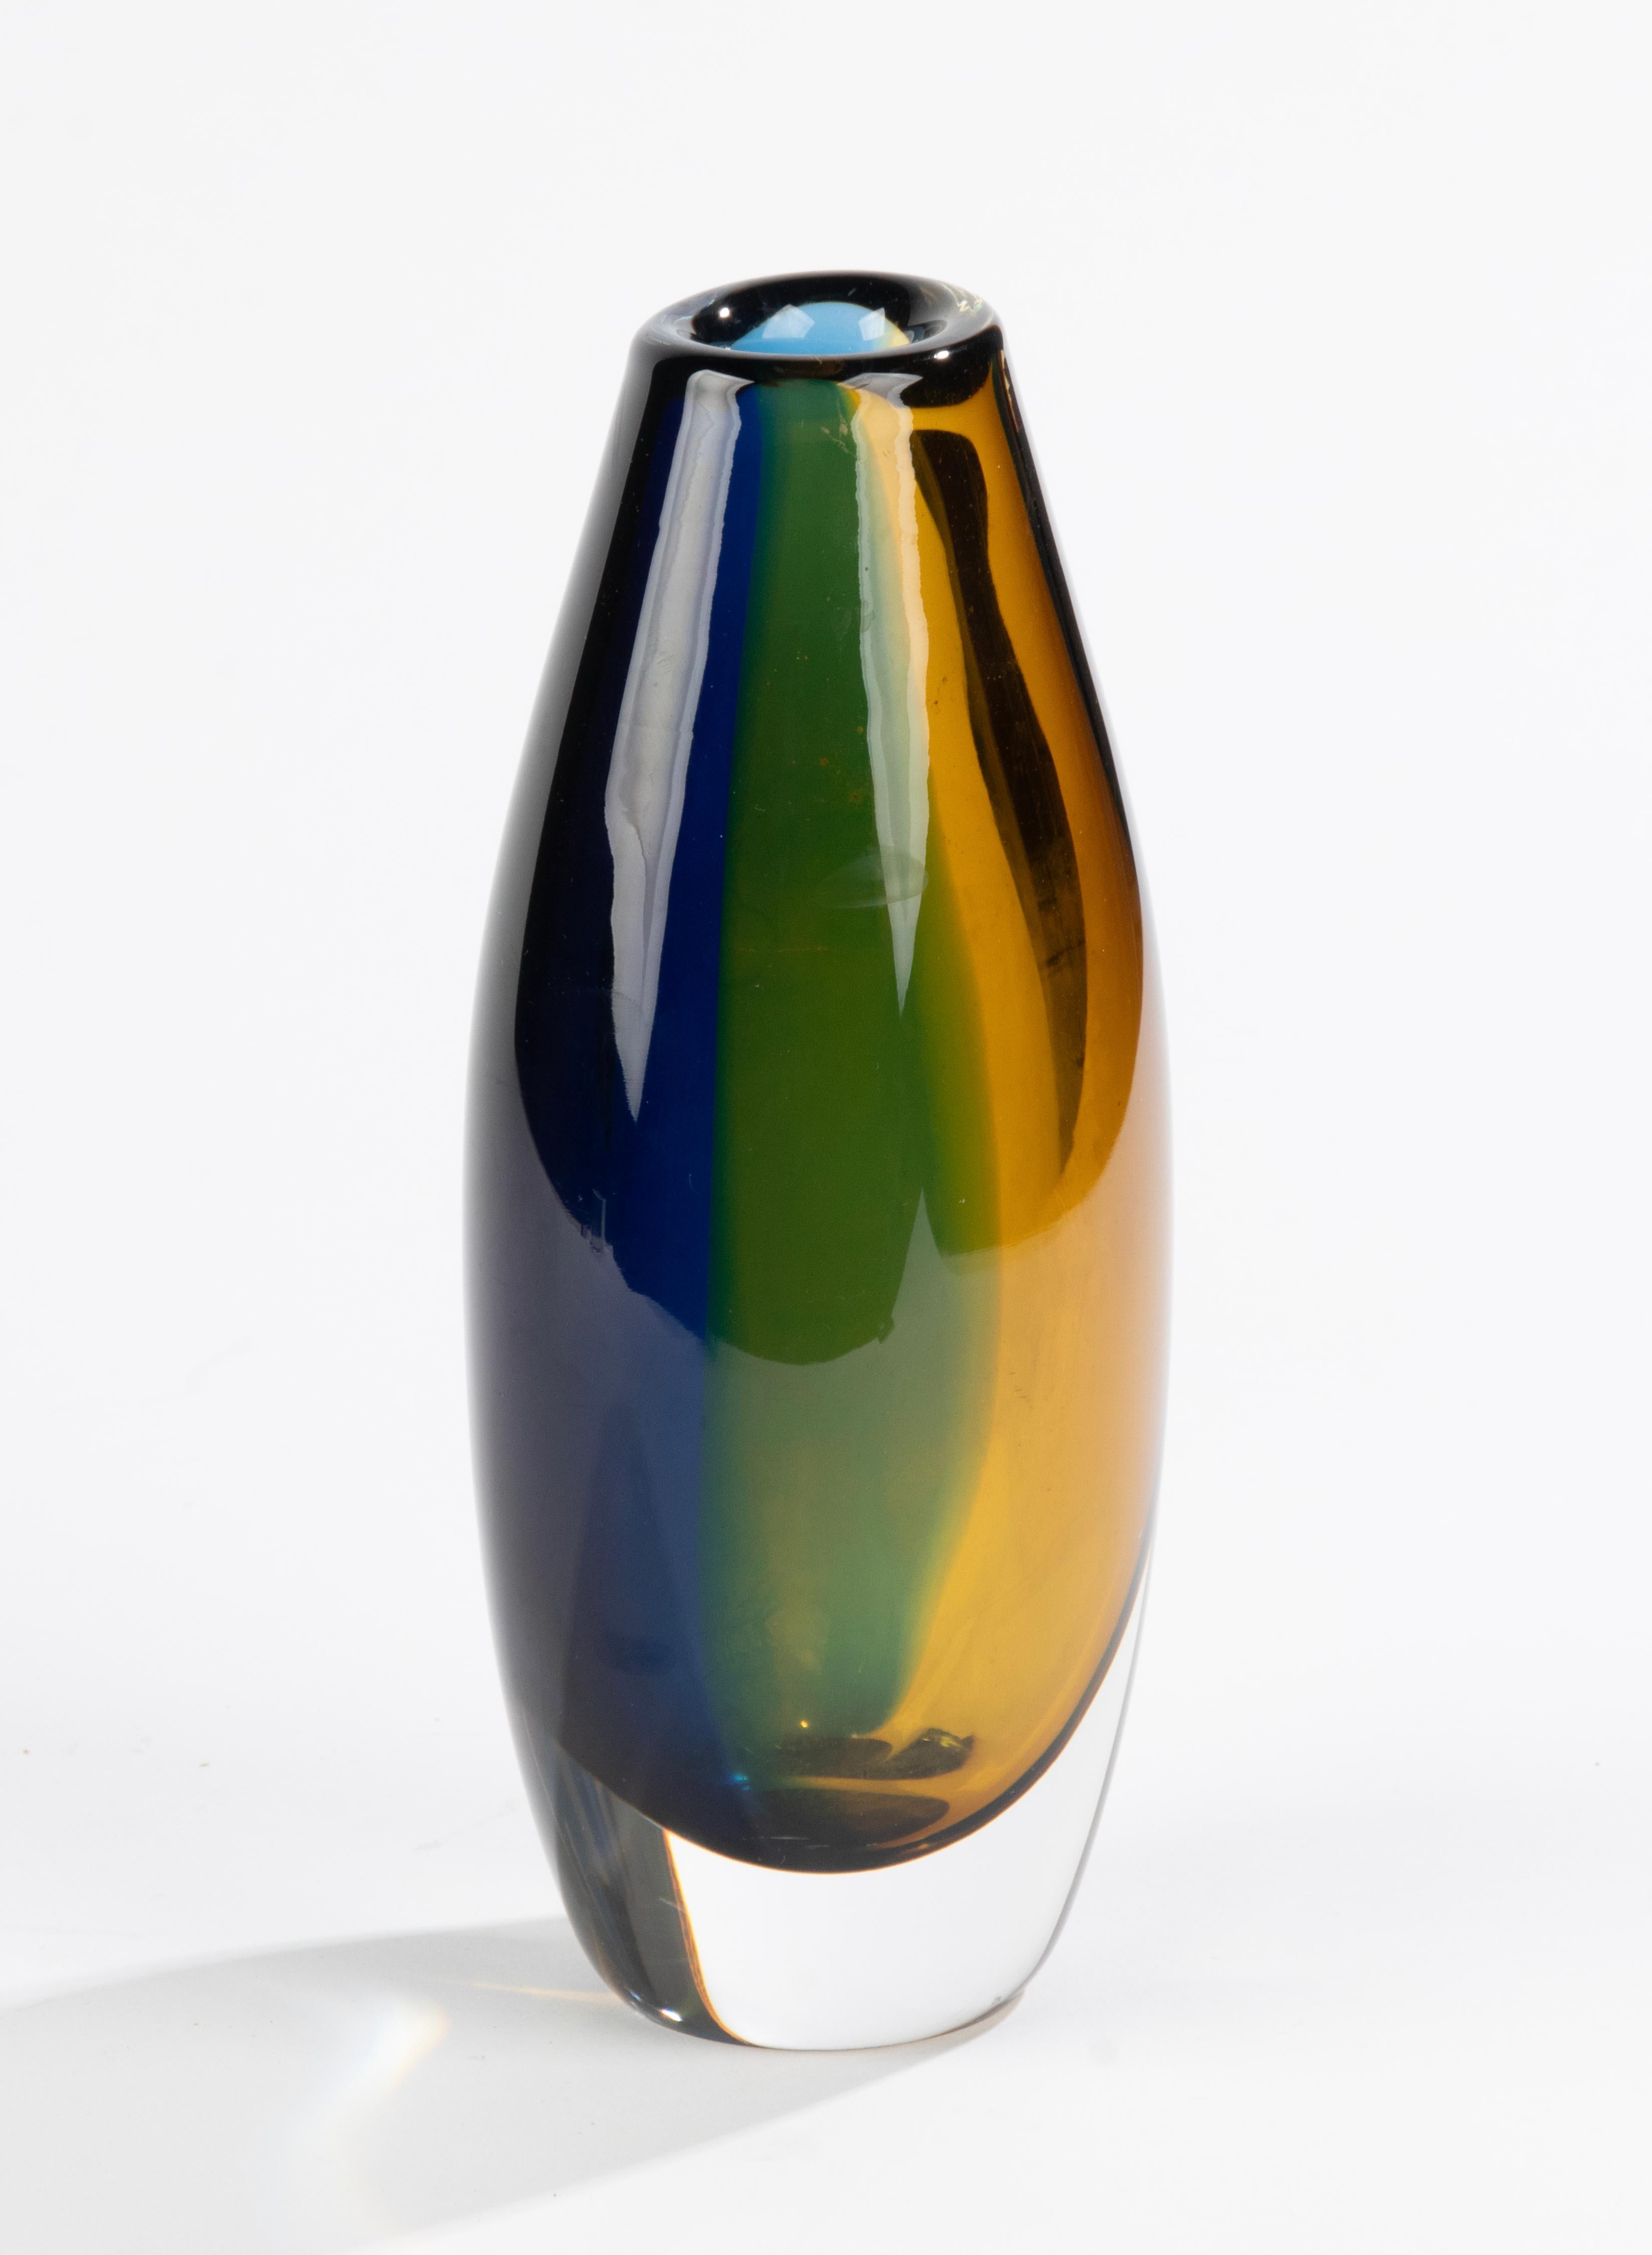 Hand-Crafted Mid Century Modern Art Glass Vase by Kosta Boda - Designed by Vicke Lindstrand  For Sale